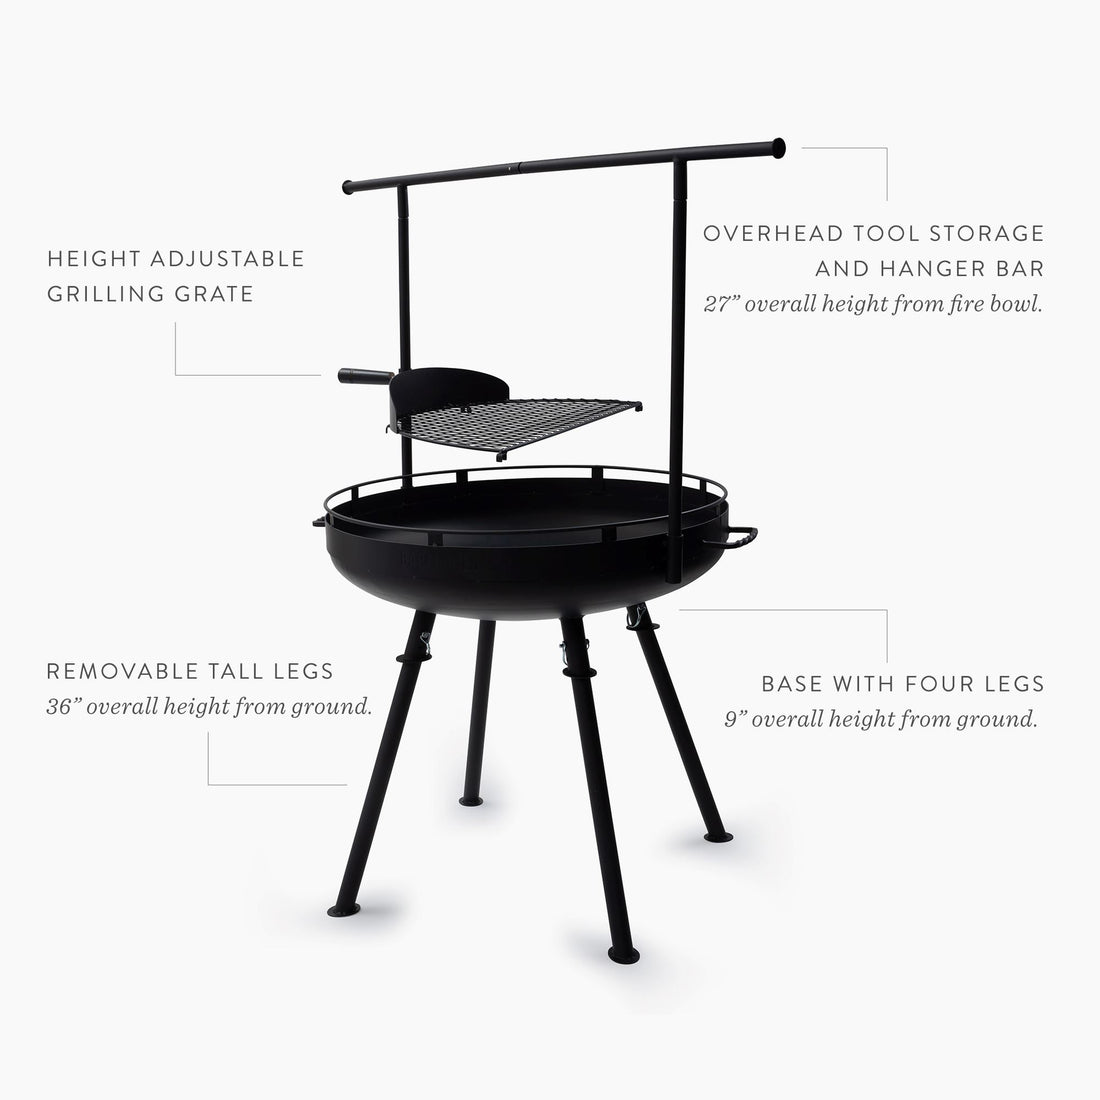 THE SUSTAINABLE ARADO GAUCHO FIRE PIT BY VARGAS BROTHERS FIRE PITS